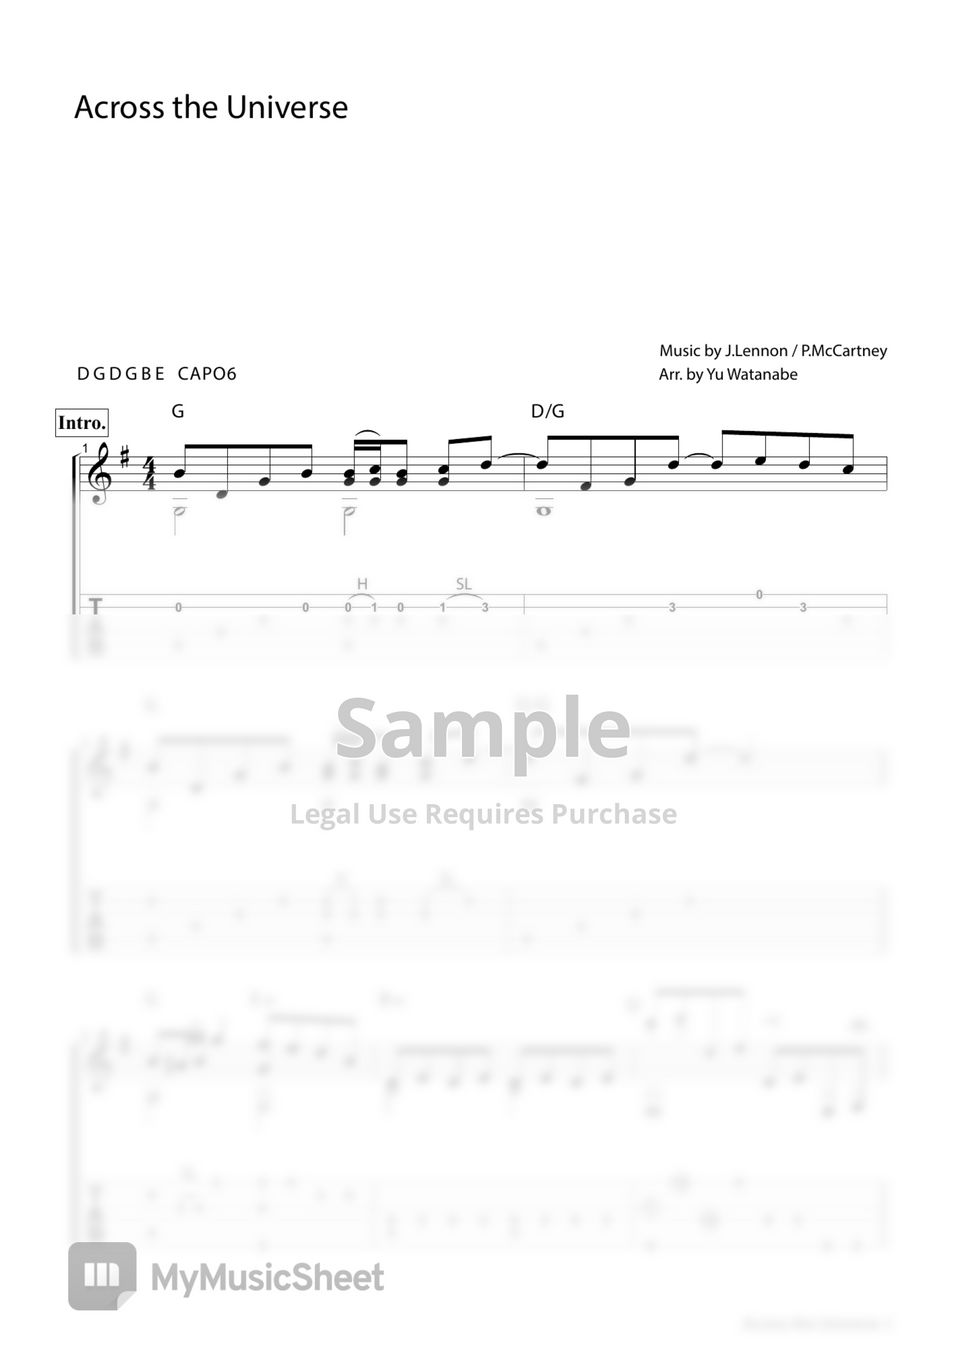 The Beatles - This cover 4 The Beatles all 14 songs TAB Score by Yu Watanabe/わたなべゆう